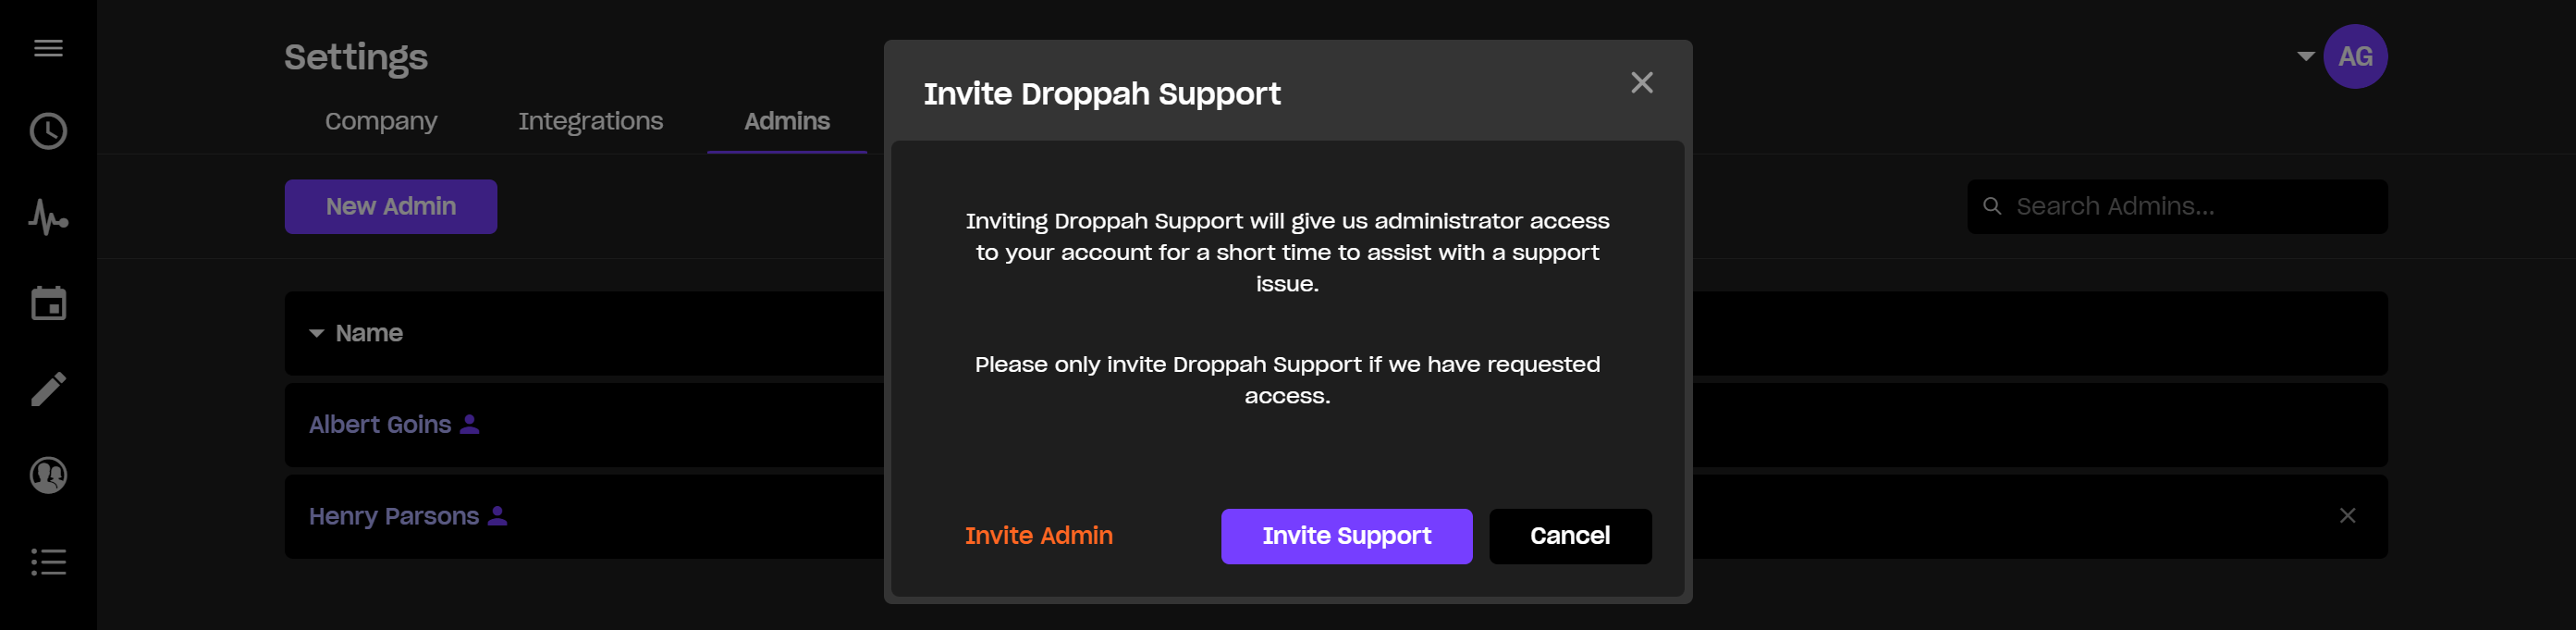 Adding_Admins_-_Confirm_Invite_Droppah_Support.png